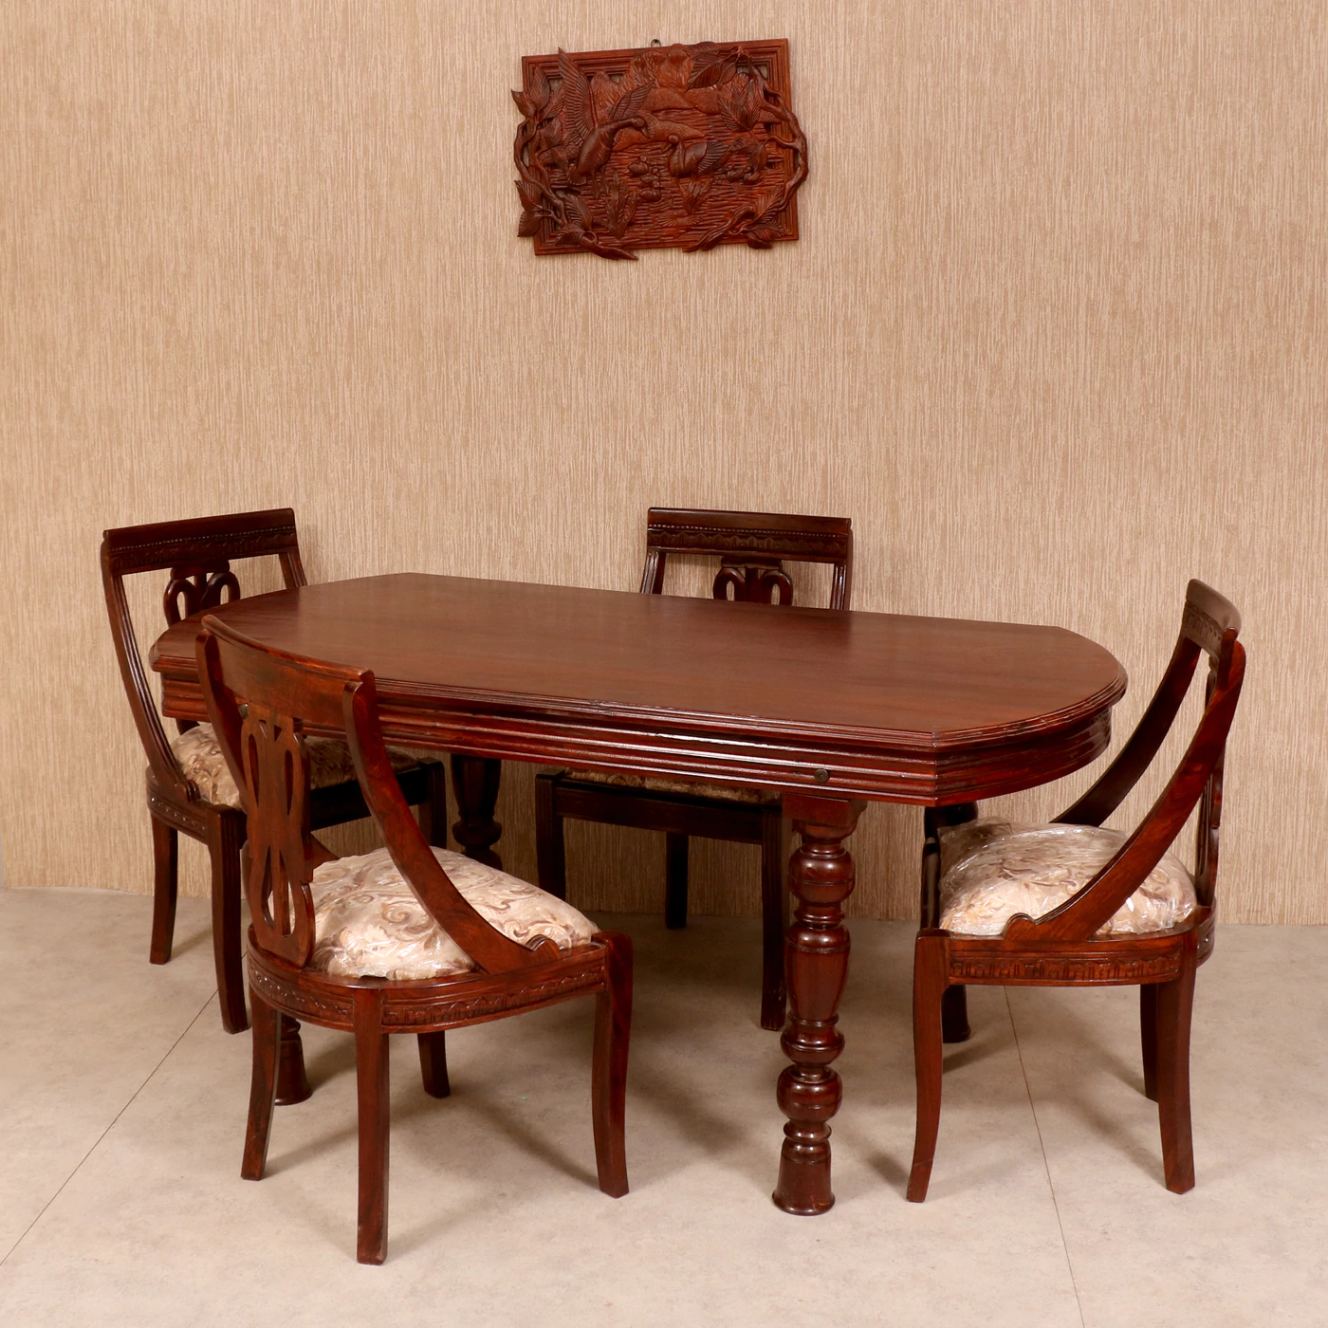 Wooden Dining Table Design for Home & Office – Woodshala